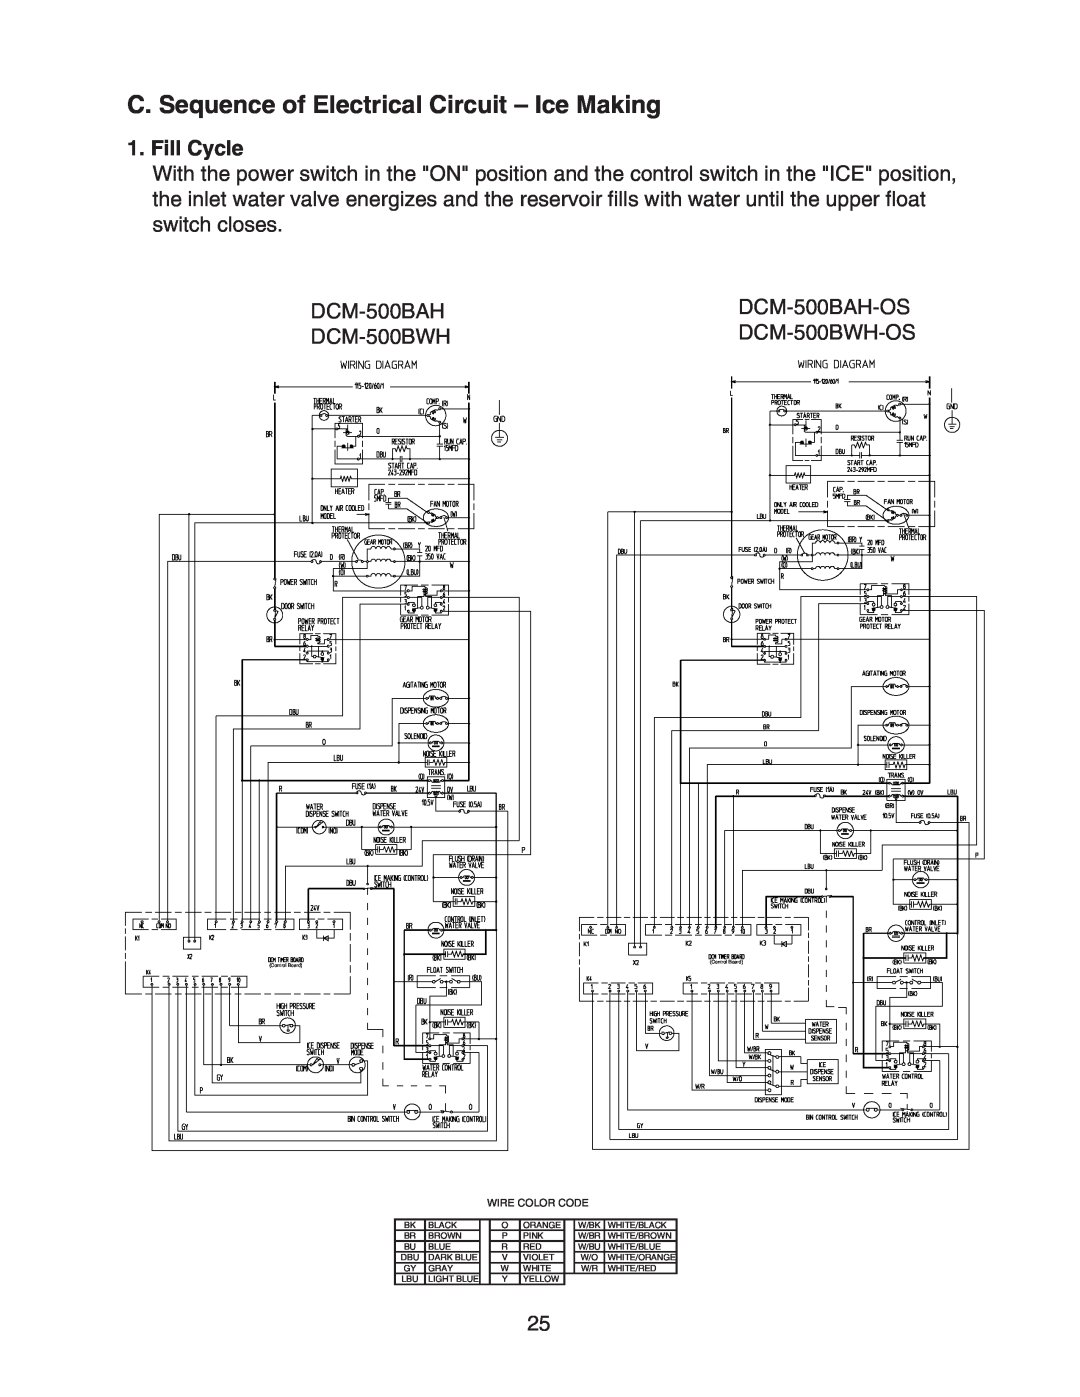 Hoshizaki DCM-500BWH-OS service manual C. Sequence of Electrical Circuit - Ice Making, Fill Cycle 